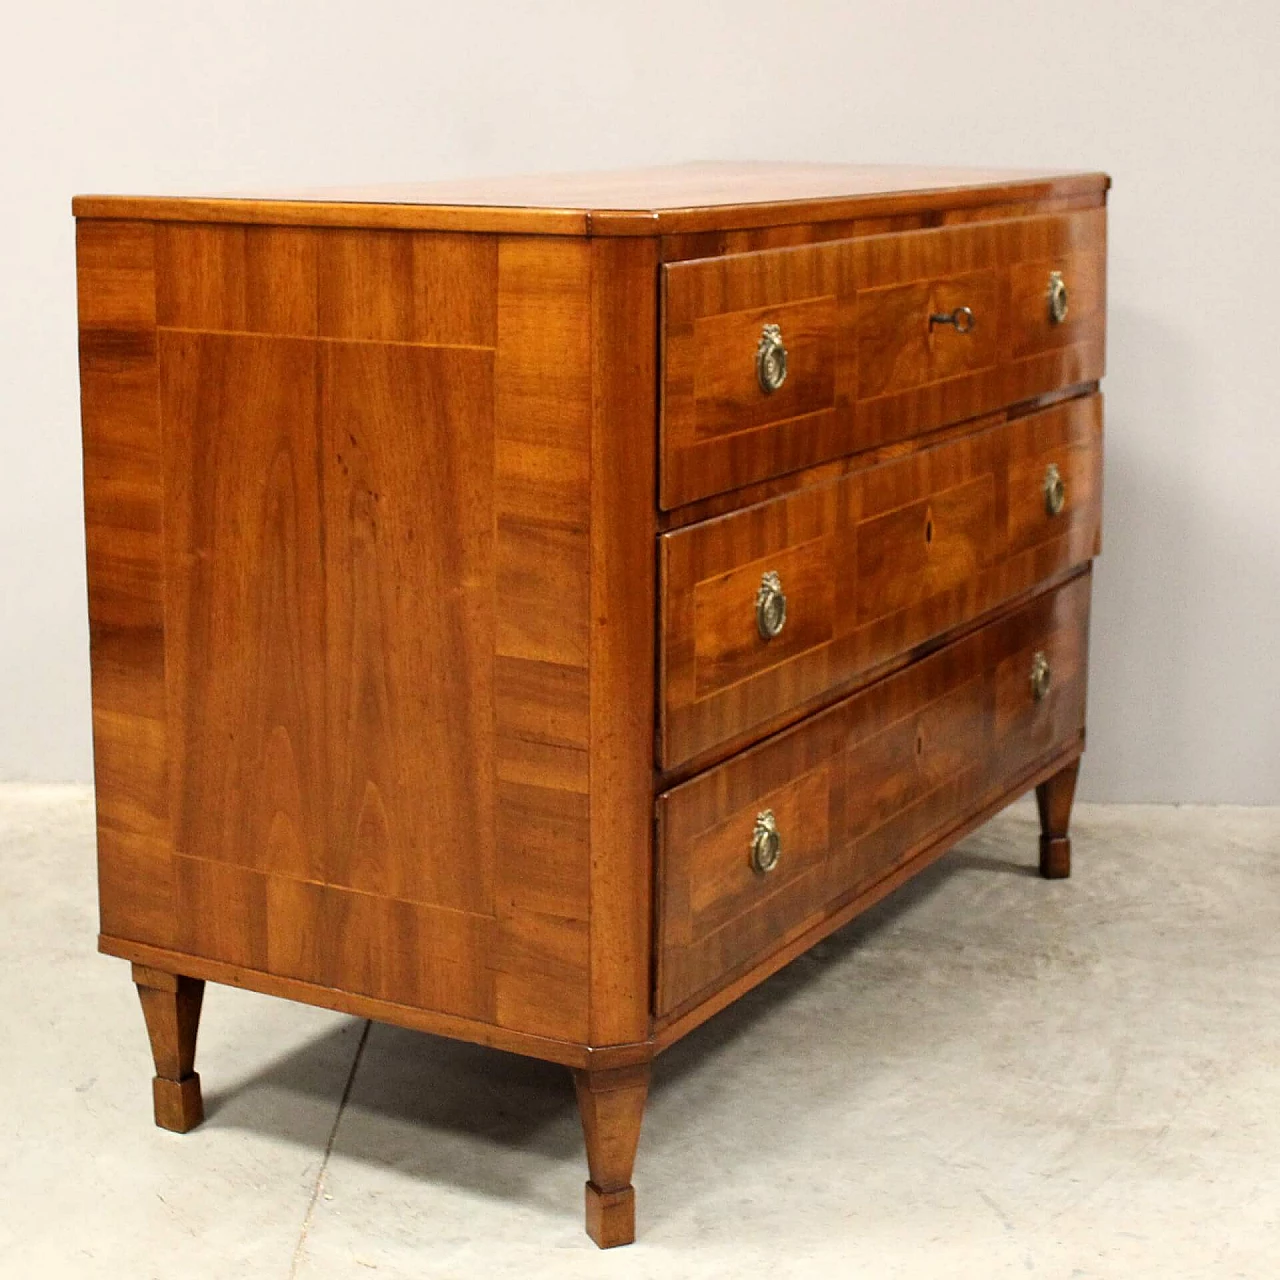 Direttorio chest of drawers in inlaid walnut, second half of the 18th century 1